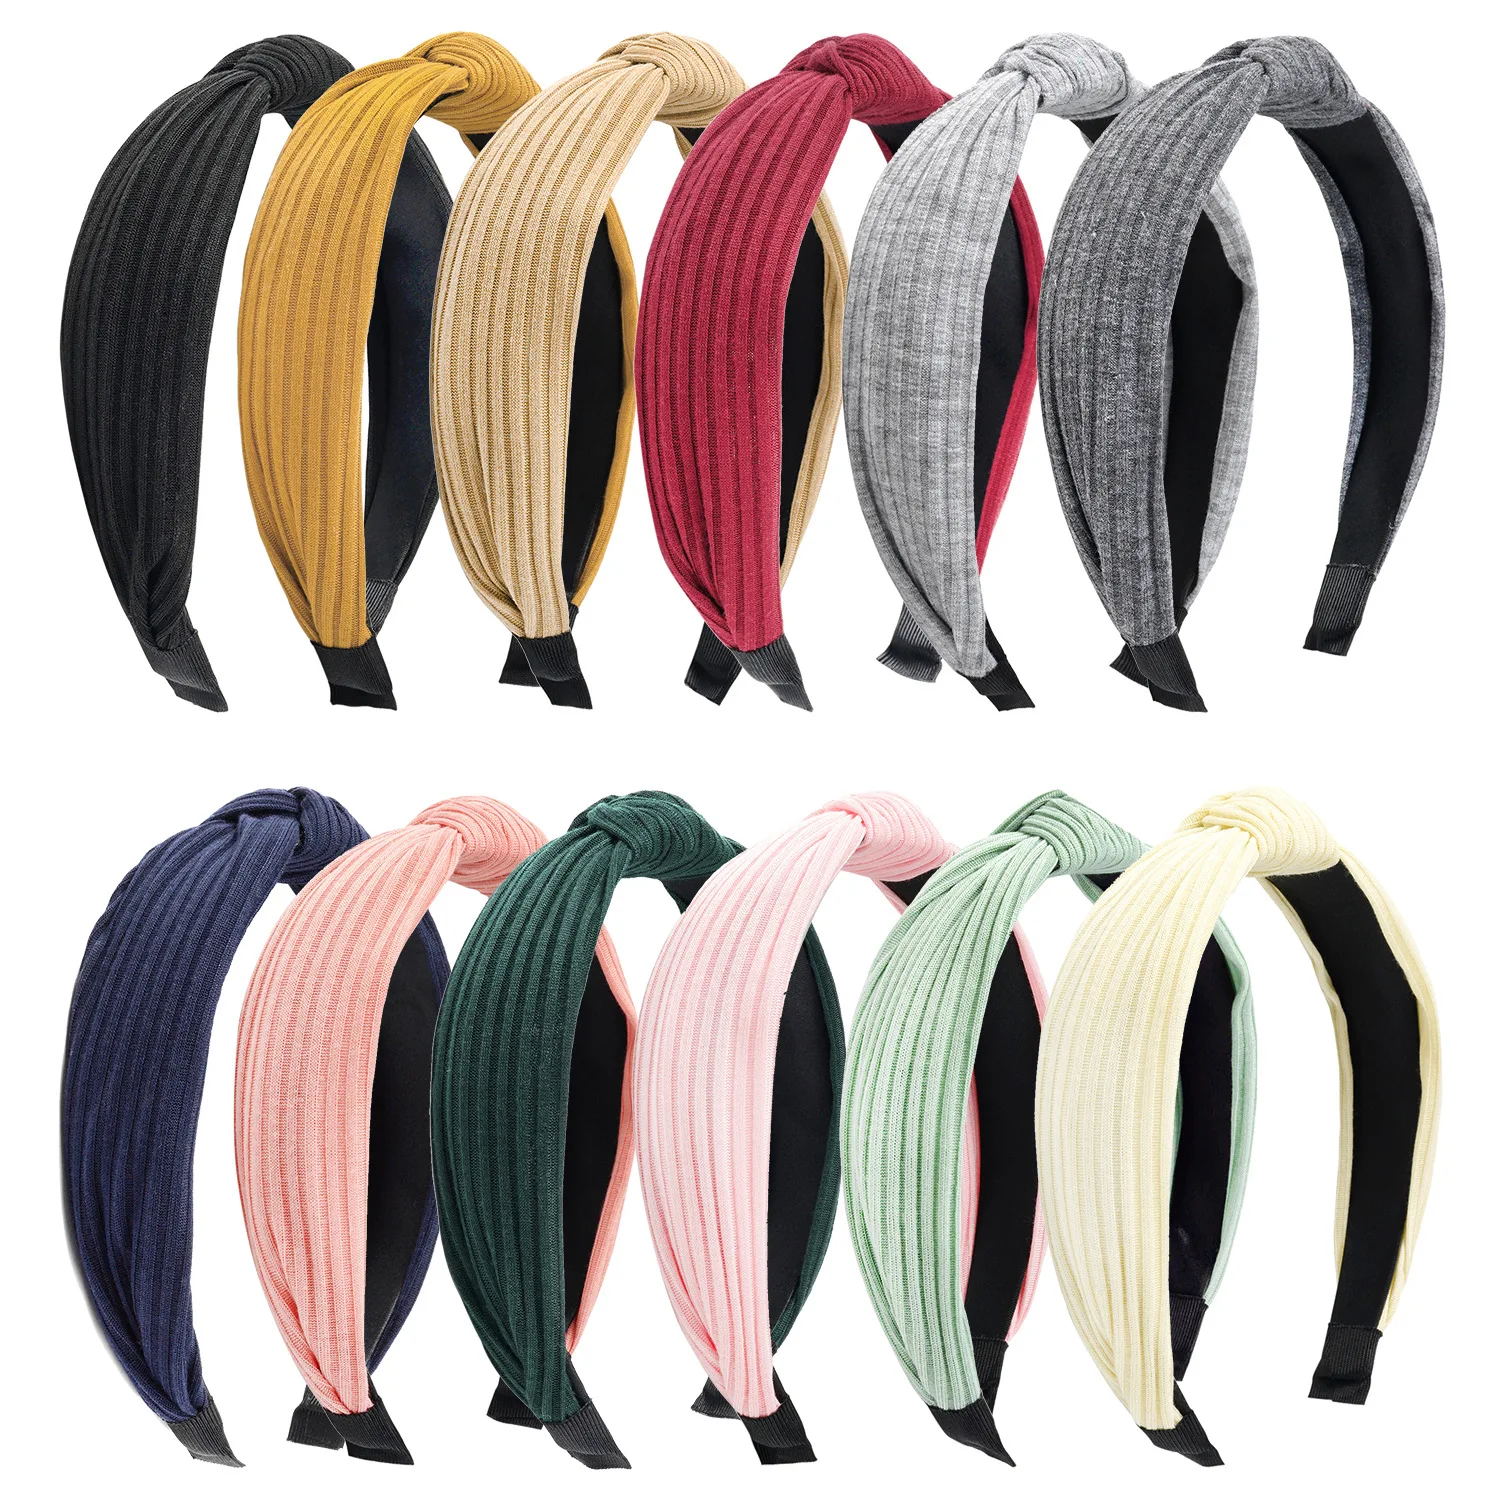 

Women Hairband Suede Knotted Solid Color Headband for Women Fashion Bowknot Hairband Hair Hoop Hair Accessories Bobby Pin